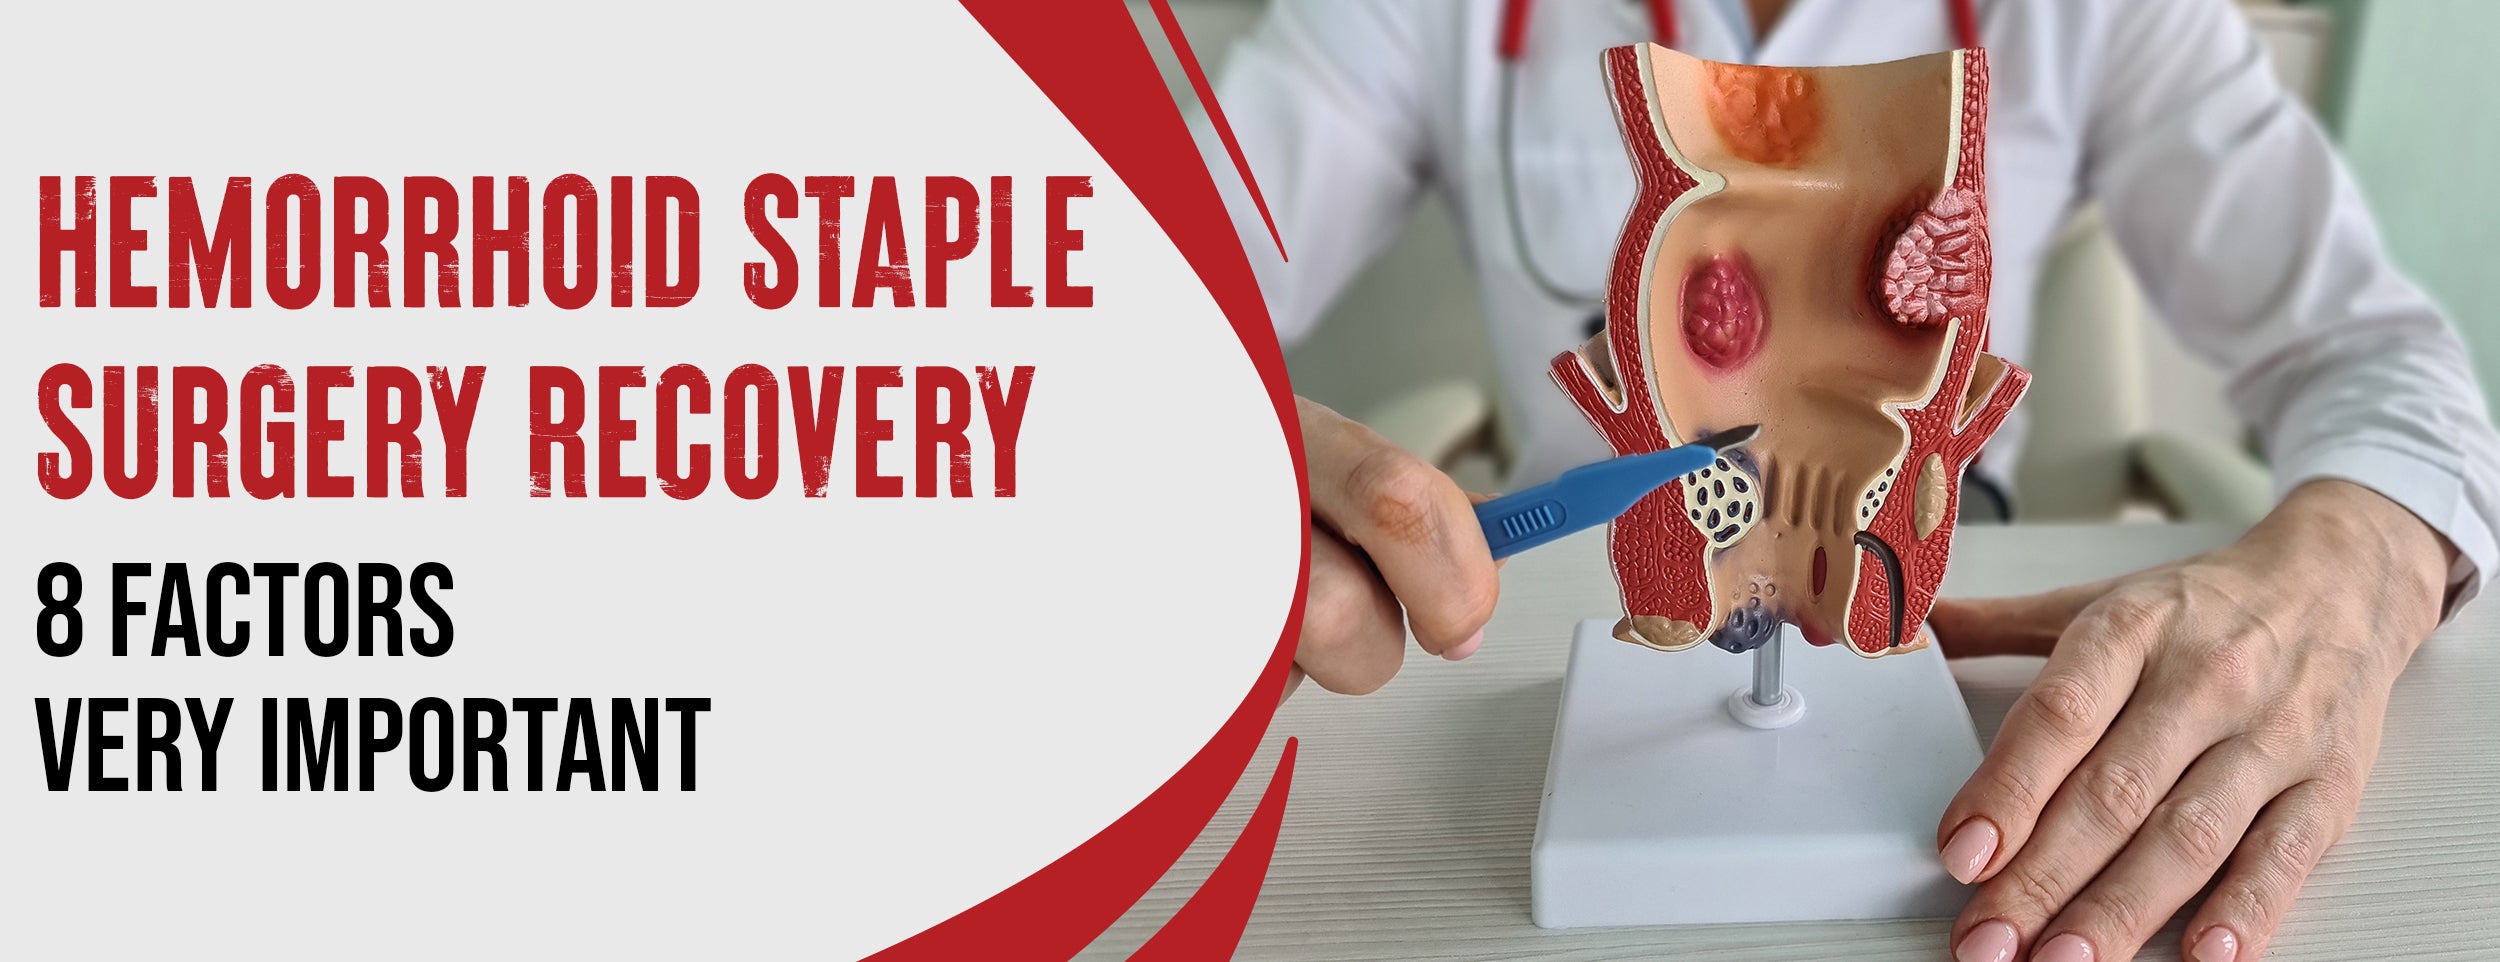 9 Procedures for Hemorrhoid Staple Surgery Recovery